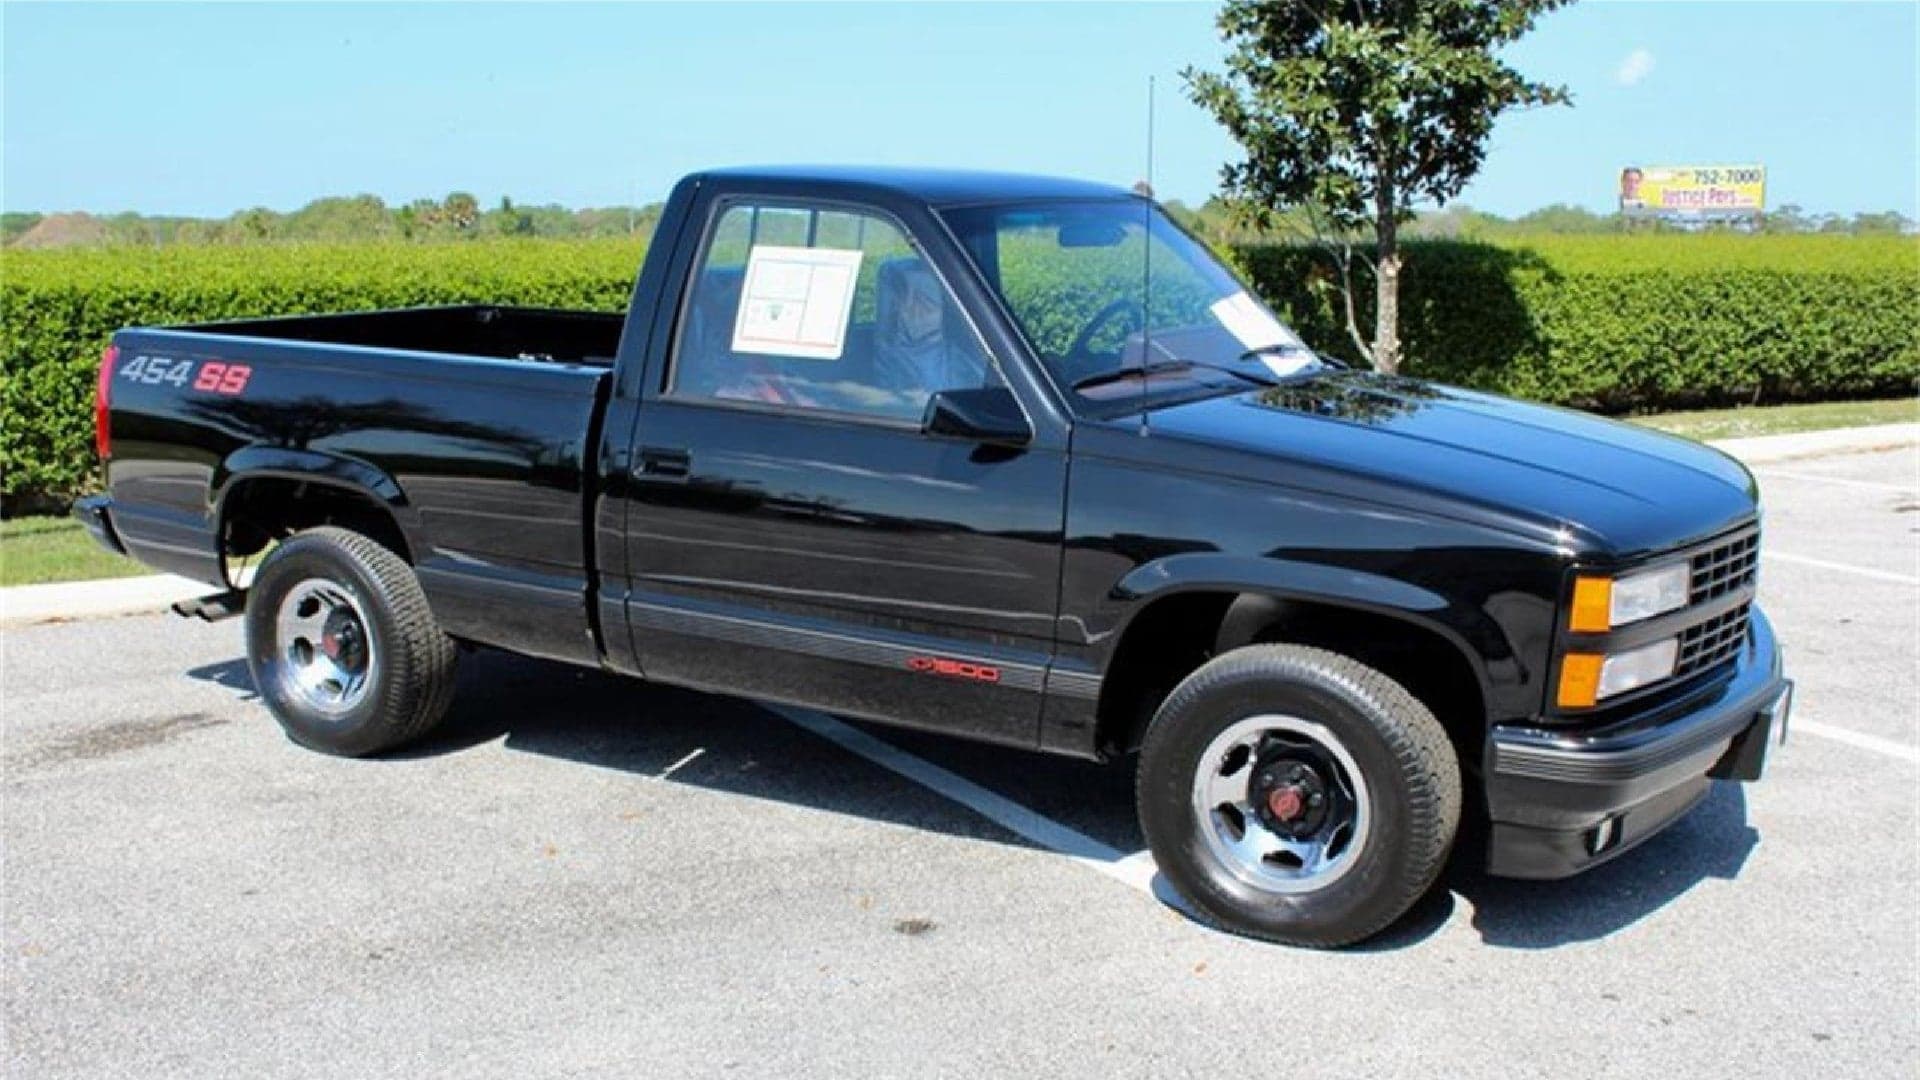 For Sale: 26-Mile 1990 Chevy 454 SS Pickup Still Rocking Its Factory Plastic Wrap